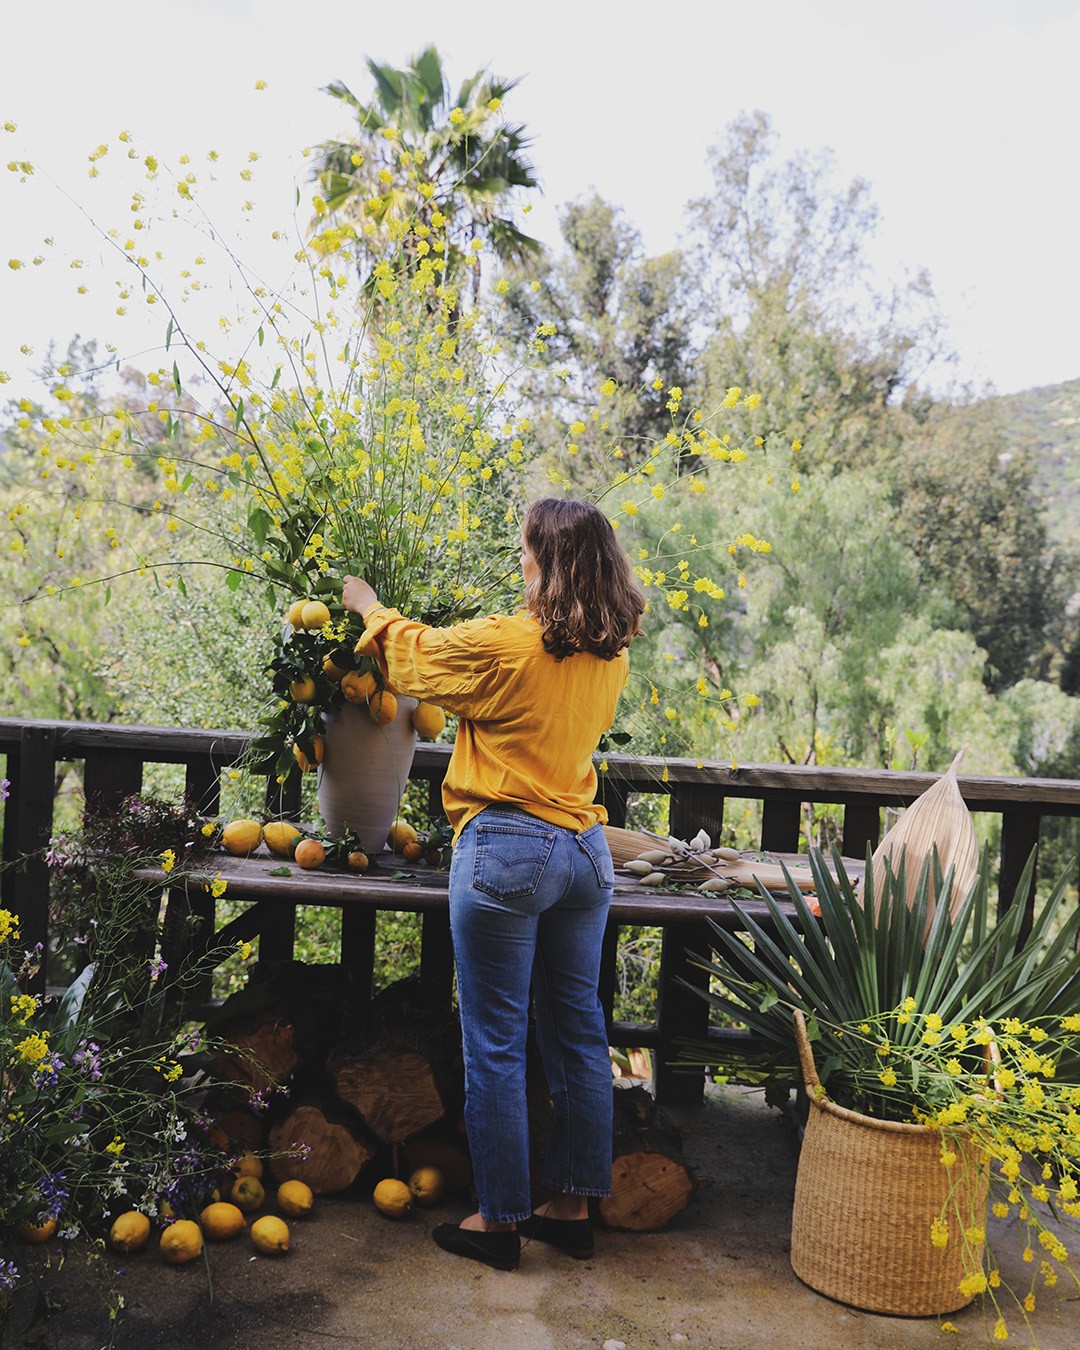 Moreno-Bunge at work on an arrangement of foraged wild mustard branches mixed with local citrus